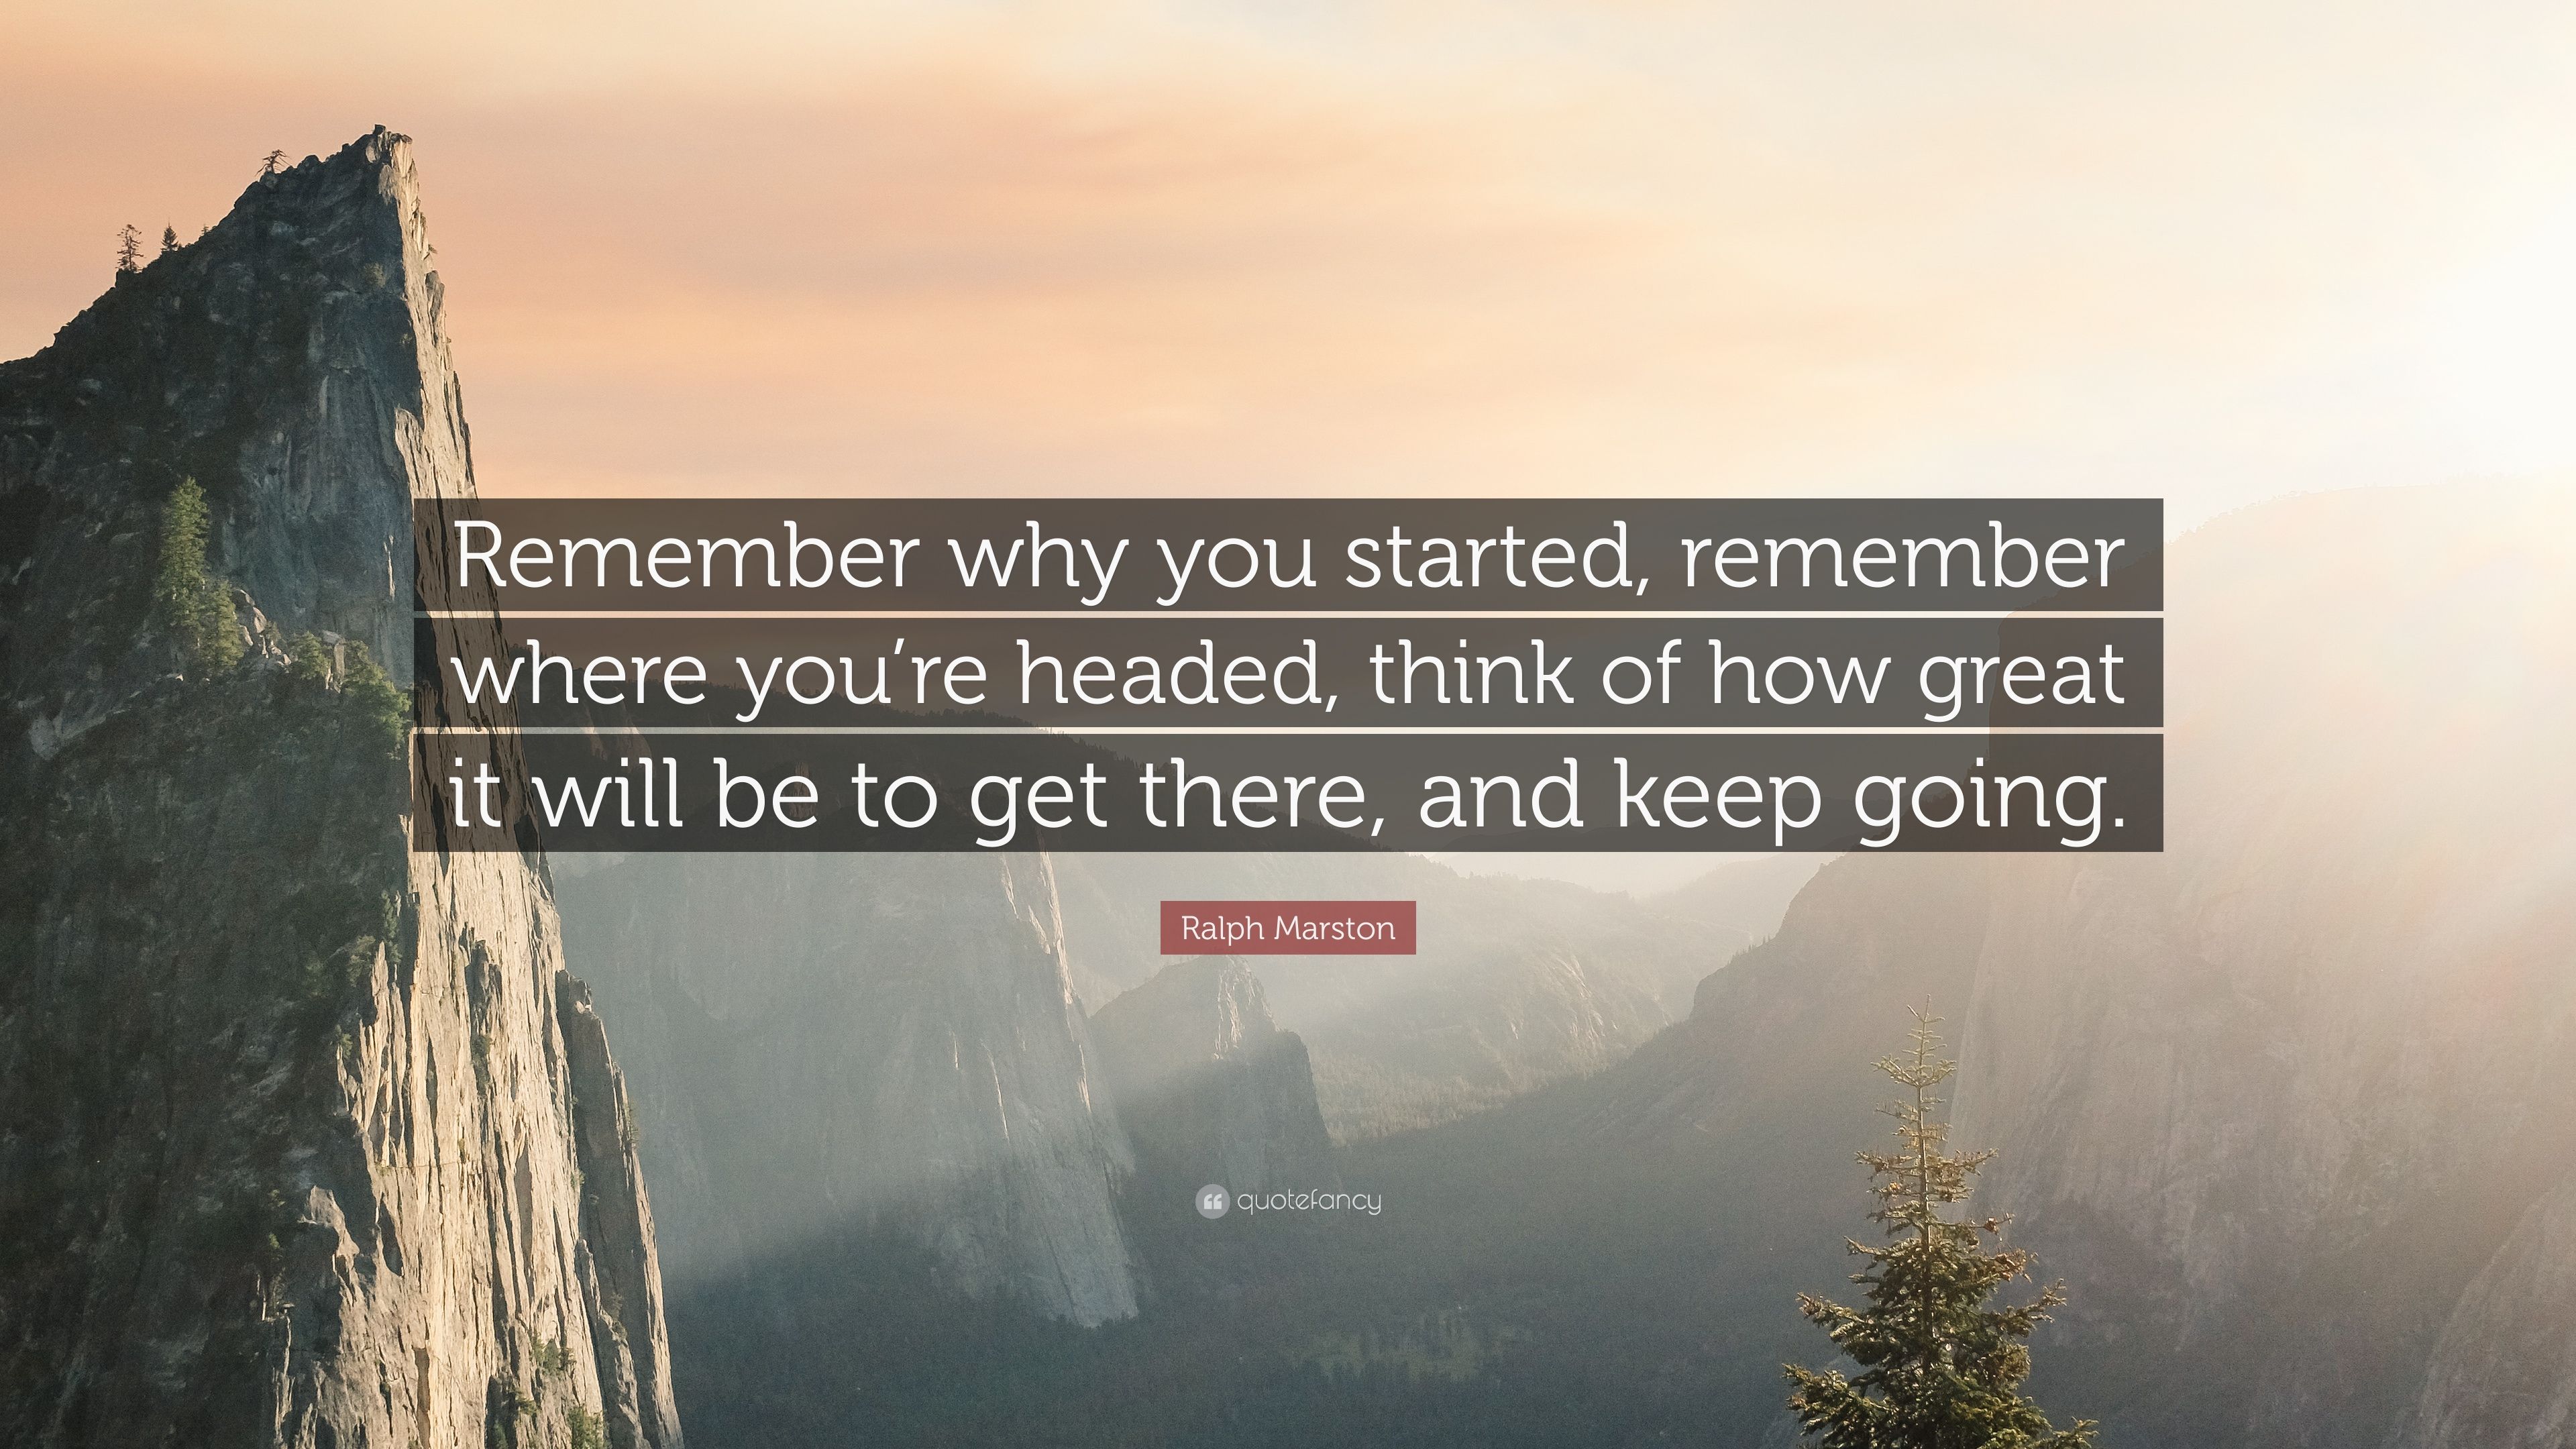 Ralph Marston Quote: “Remember why you started, remember where you're headed, think of how great